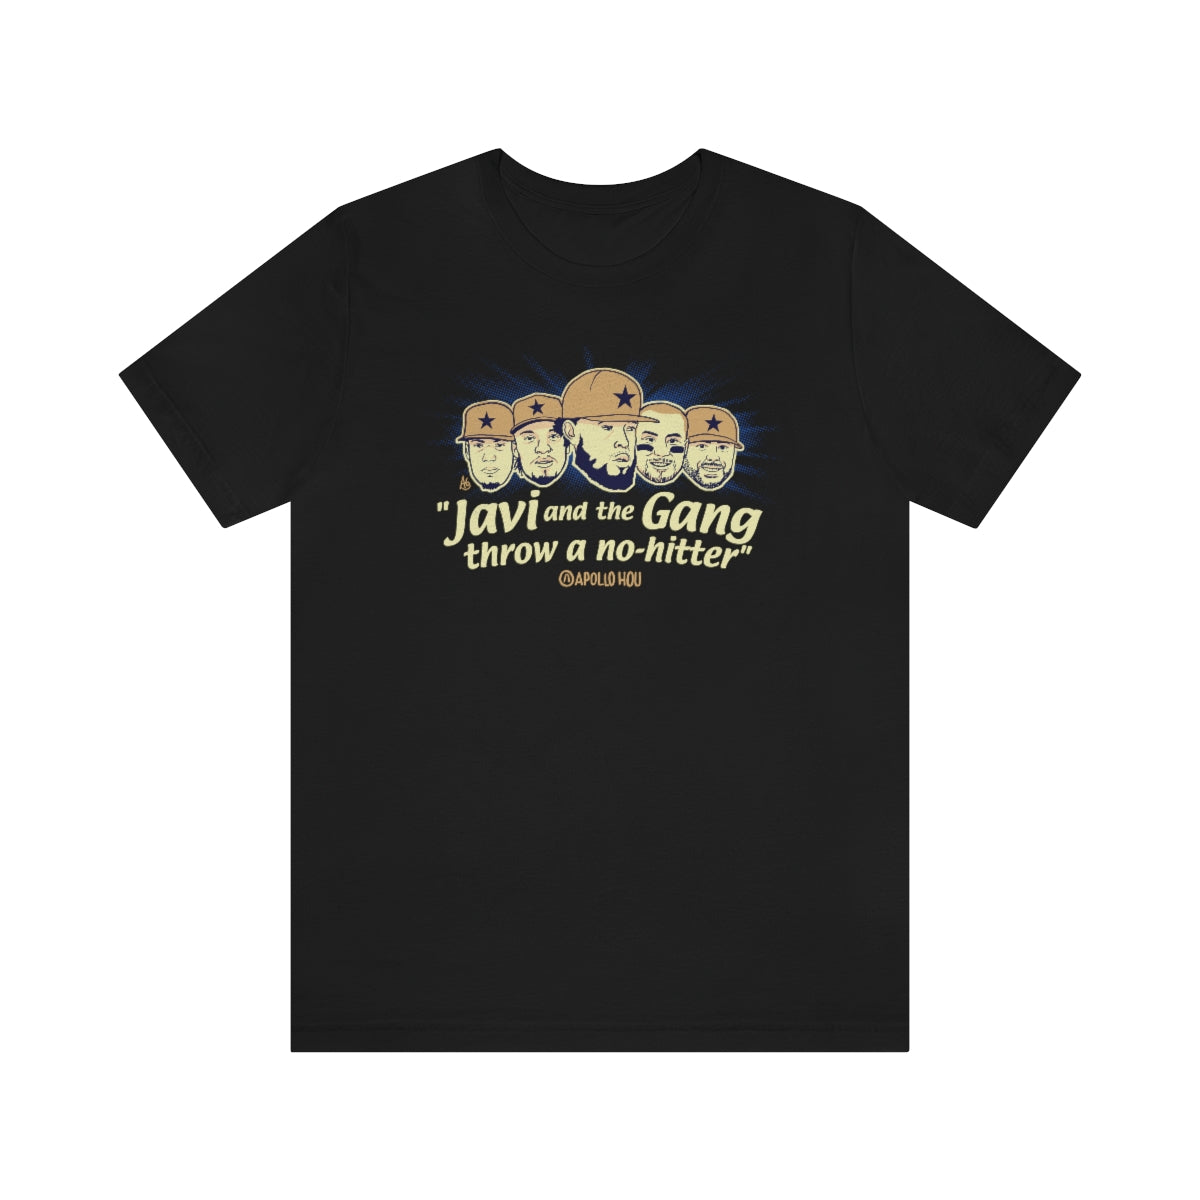 "Javi and the GANG throw a no-hitter" Unisex Jersey Tee